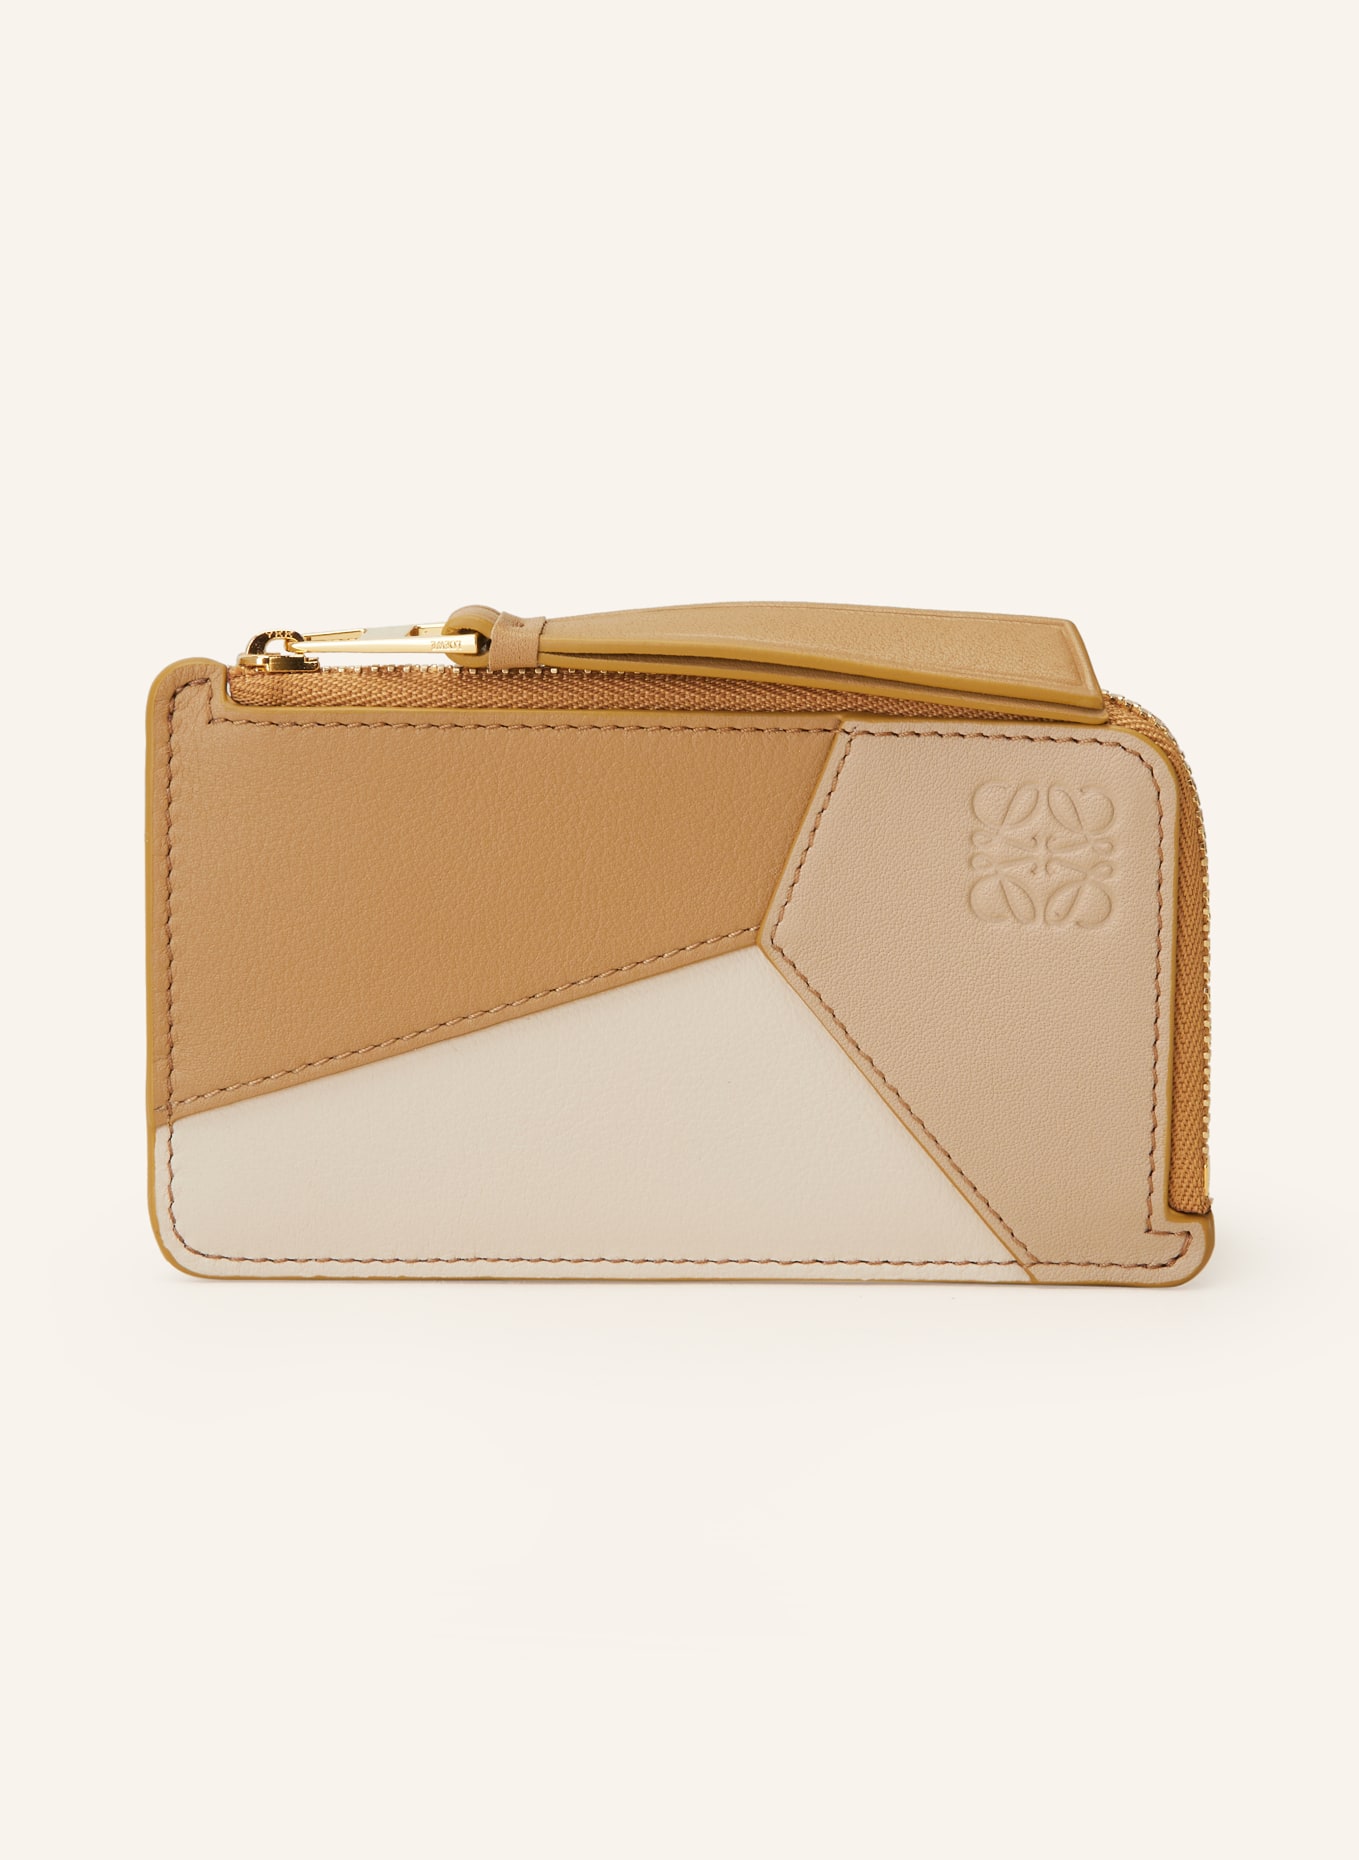 LOEWE Card case PUZZLE with coin compartment, Color: LIGHT BROWN/ BEIGE/ CAMEL (Image 1)